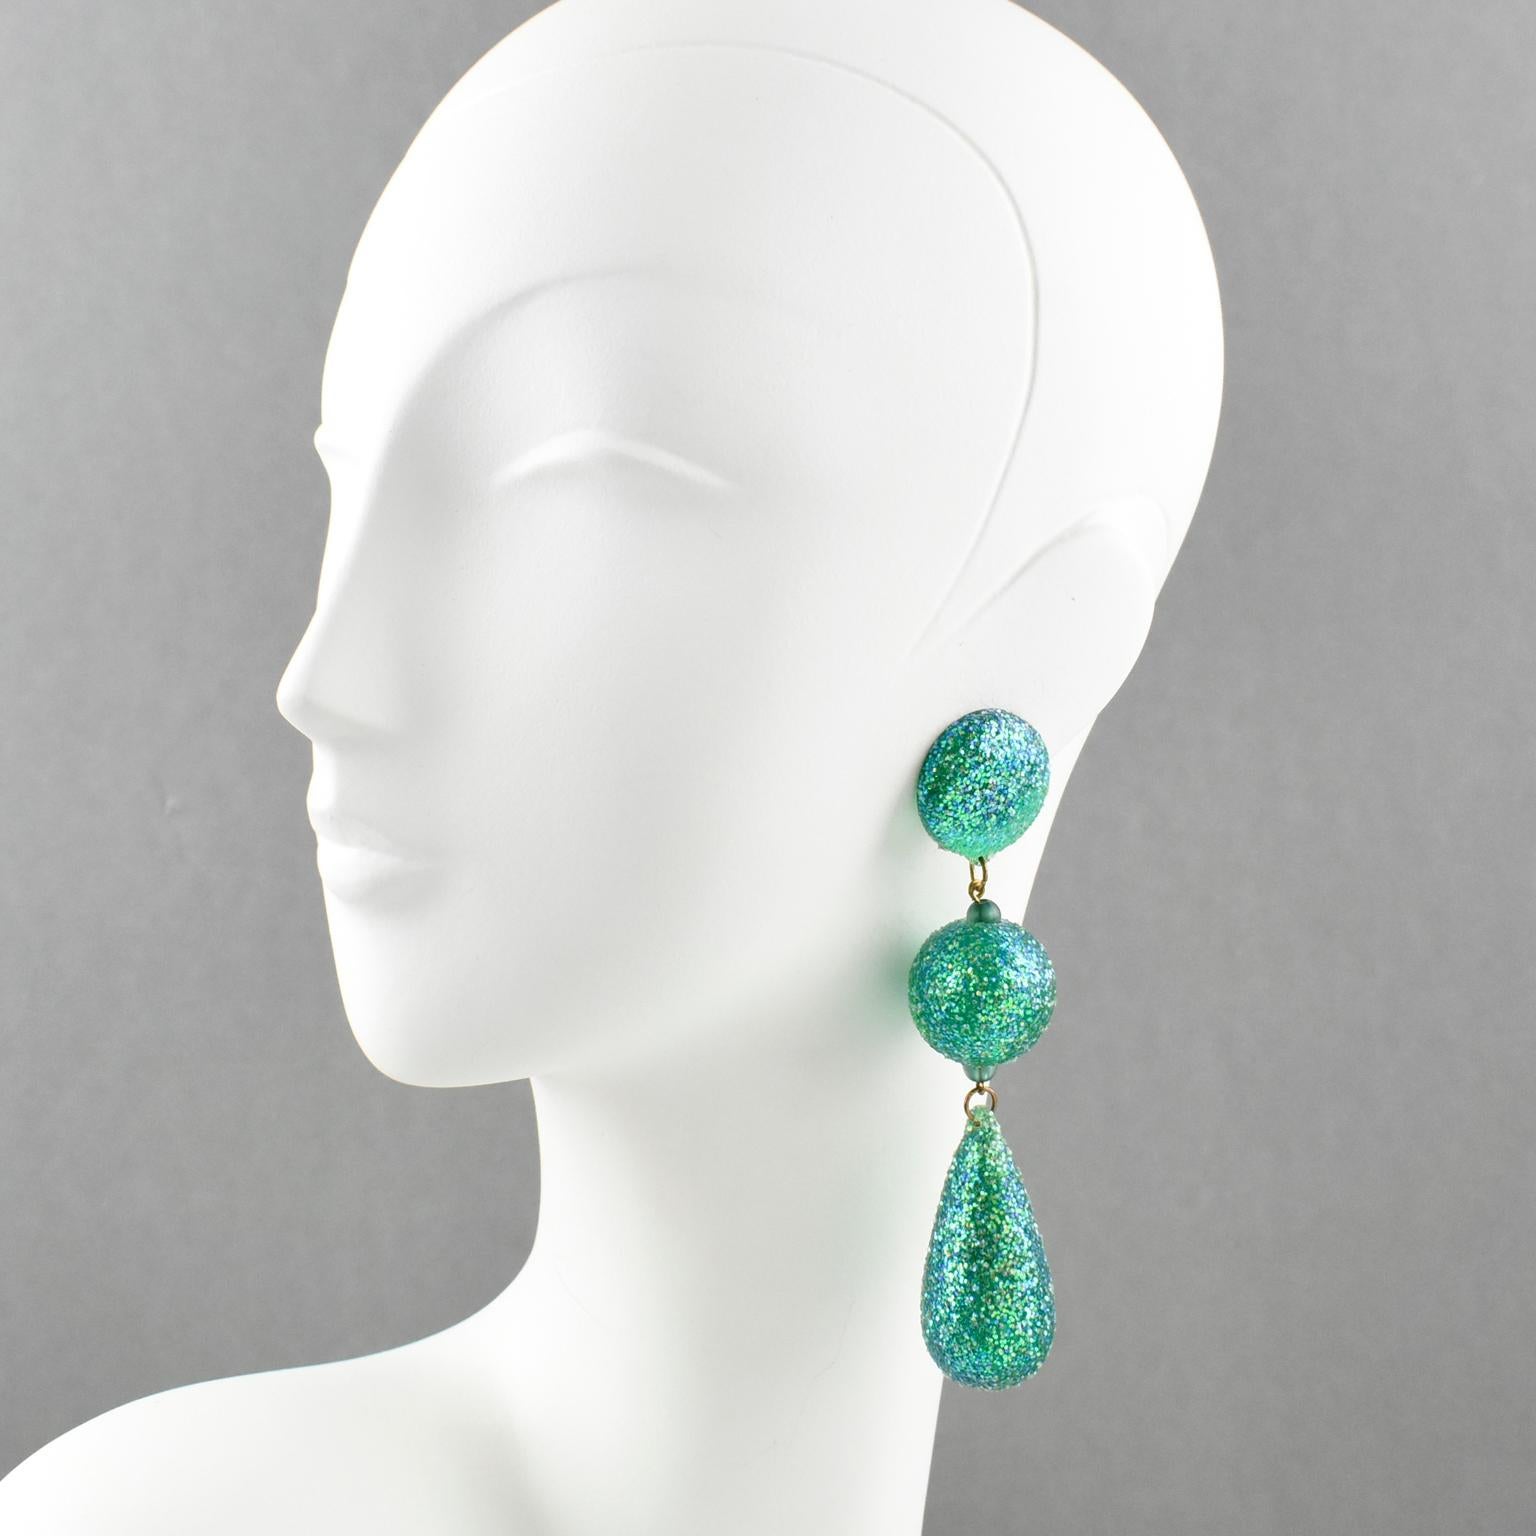 Feel like a dancing disco girl !!!
These clip on earrings are the perfect 1980s look. Oversized chandelier dangle shape with ball and drop elements in turquoise green Lucite all covered with high glitter flakes. No visible marking.
Measurements: 1